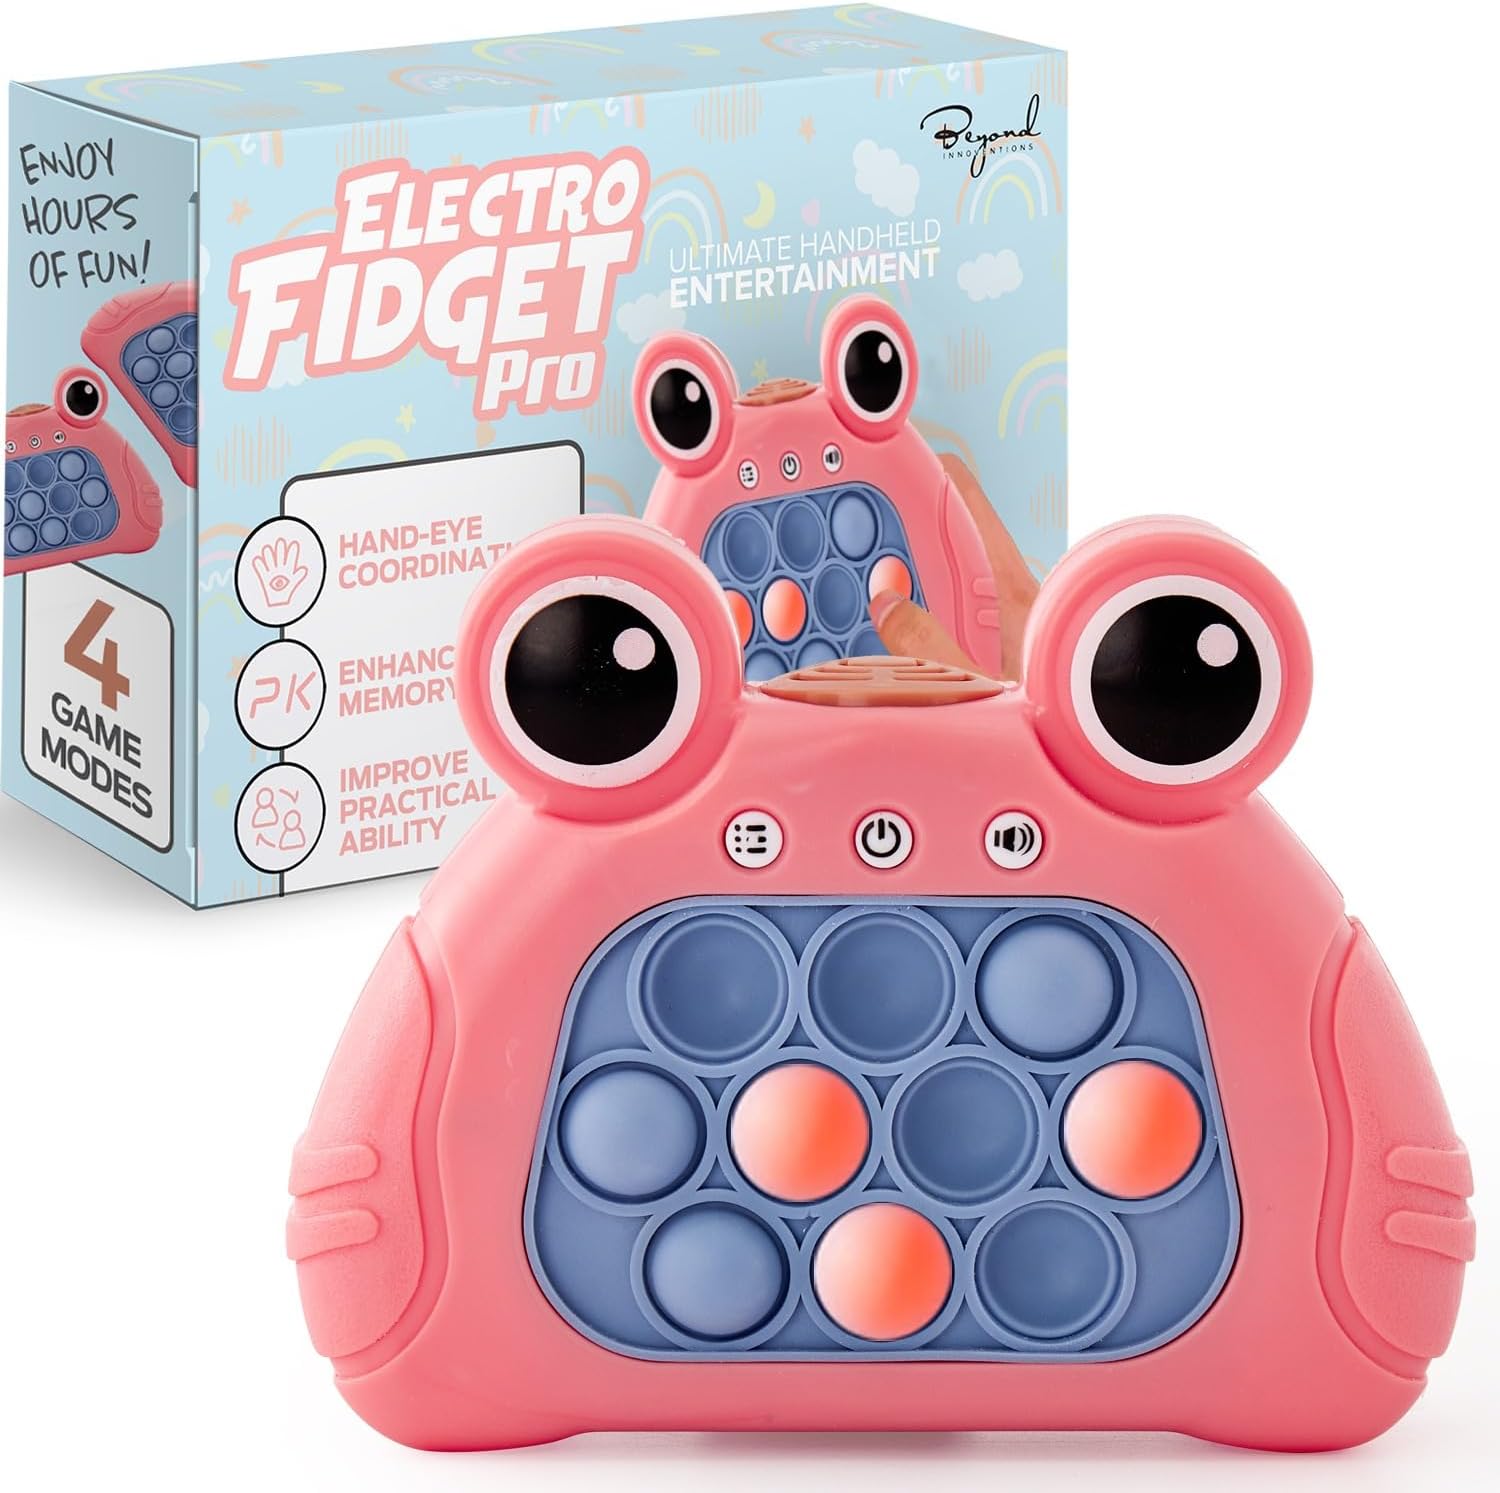 Fast Push Game | Pop It Game Light Up Fidget Toy | The Fidget Game | Quick Push Bubble Game for Educational and Memory Growth | Speed Push Pop Game Push Game Fidget Toy (Pink Frog)